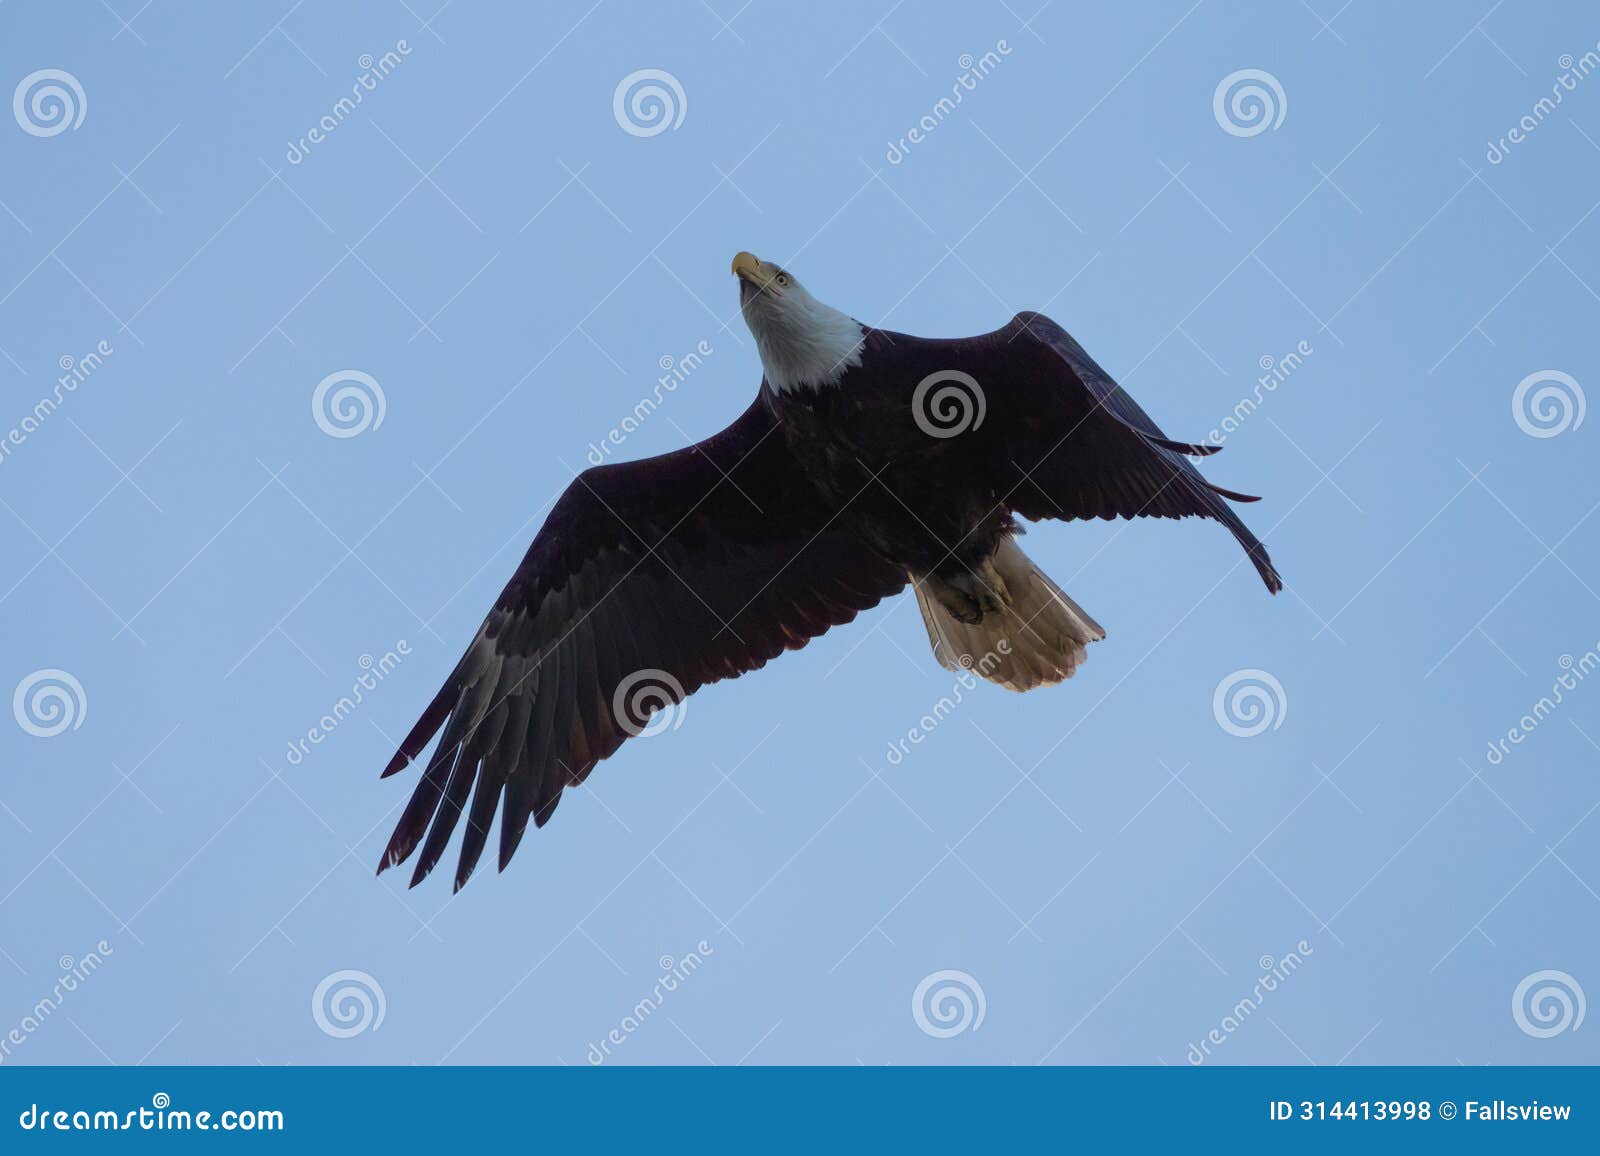 bald eagle gliding in the sky